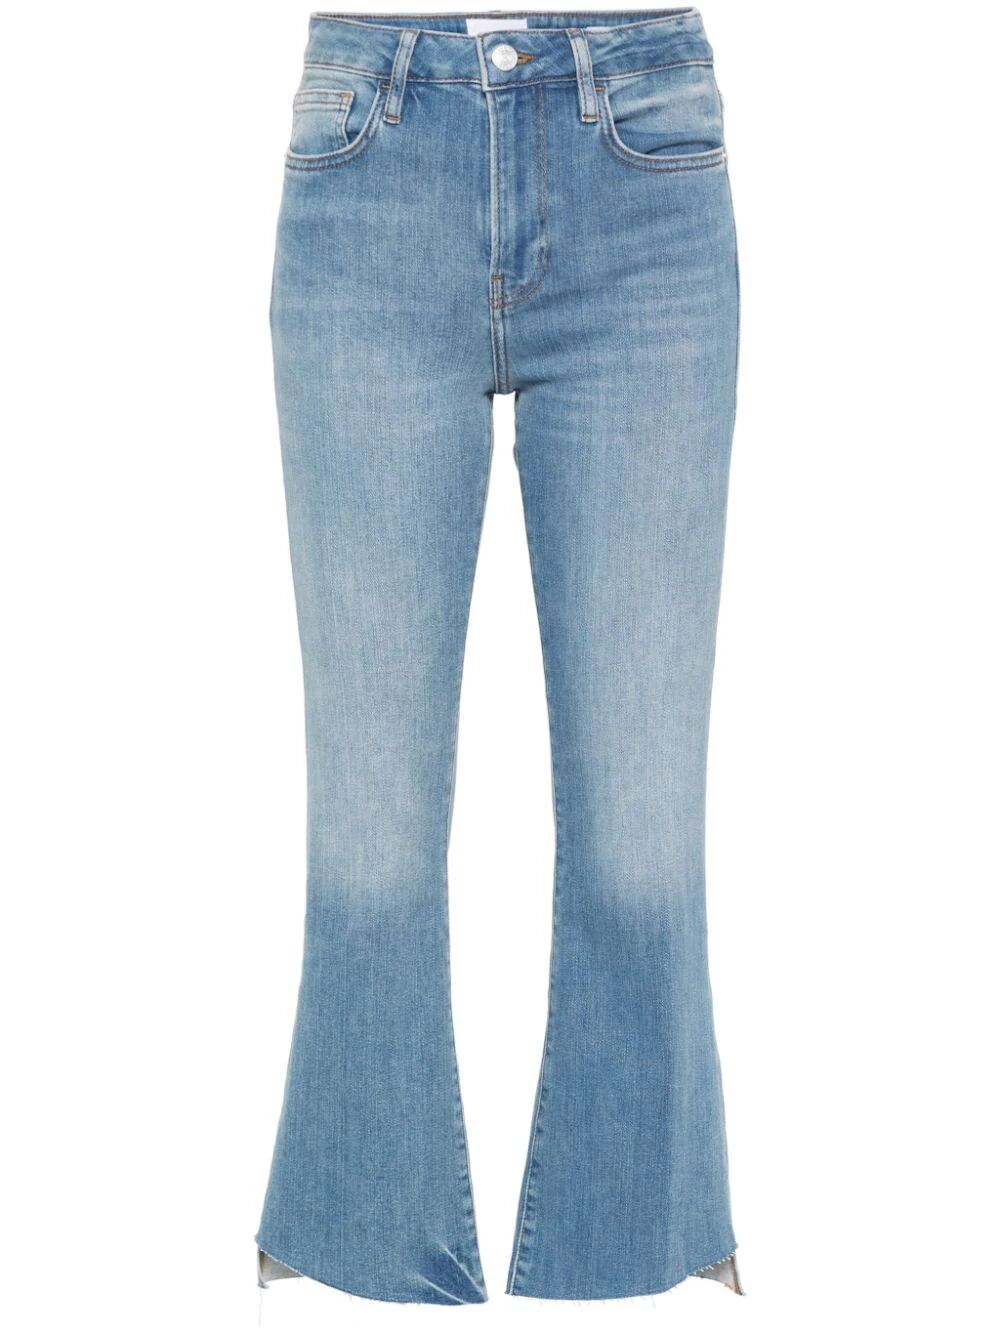 whiskering-effect bootcut jeans